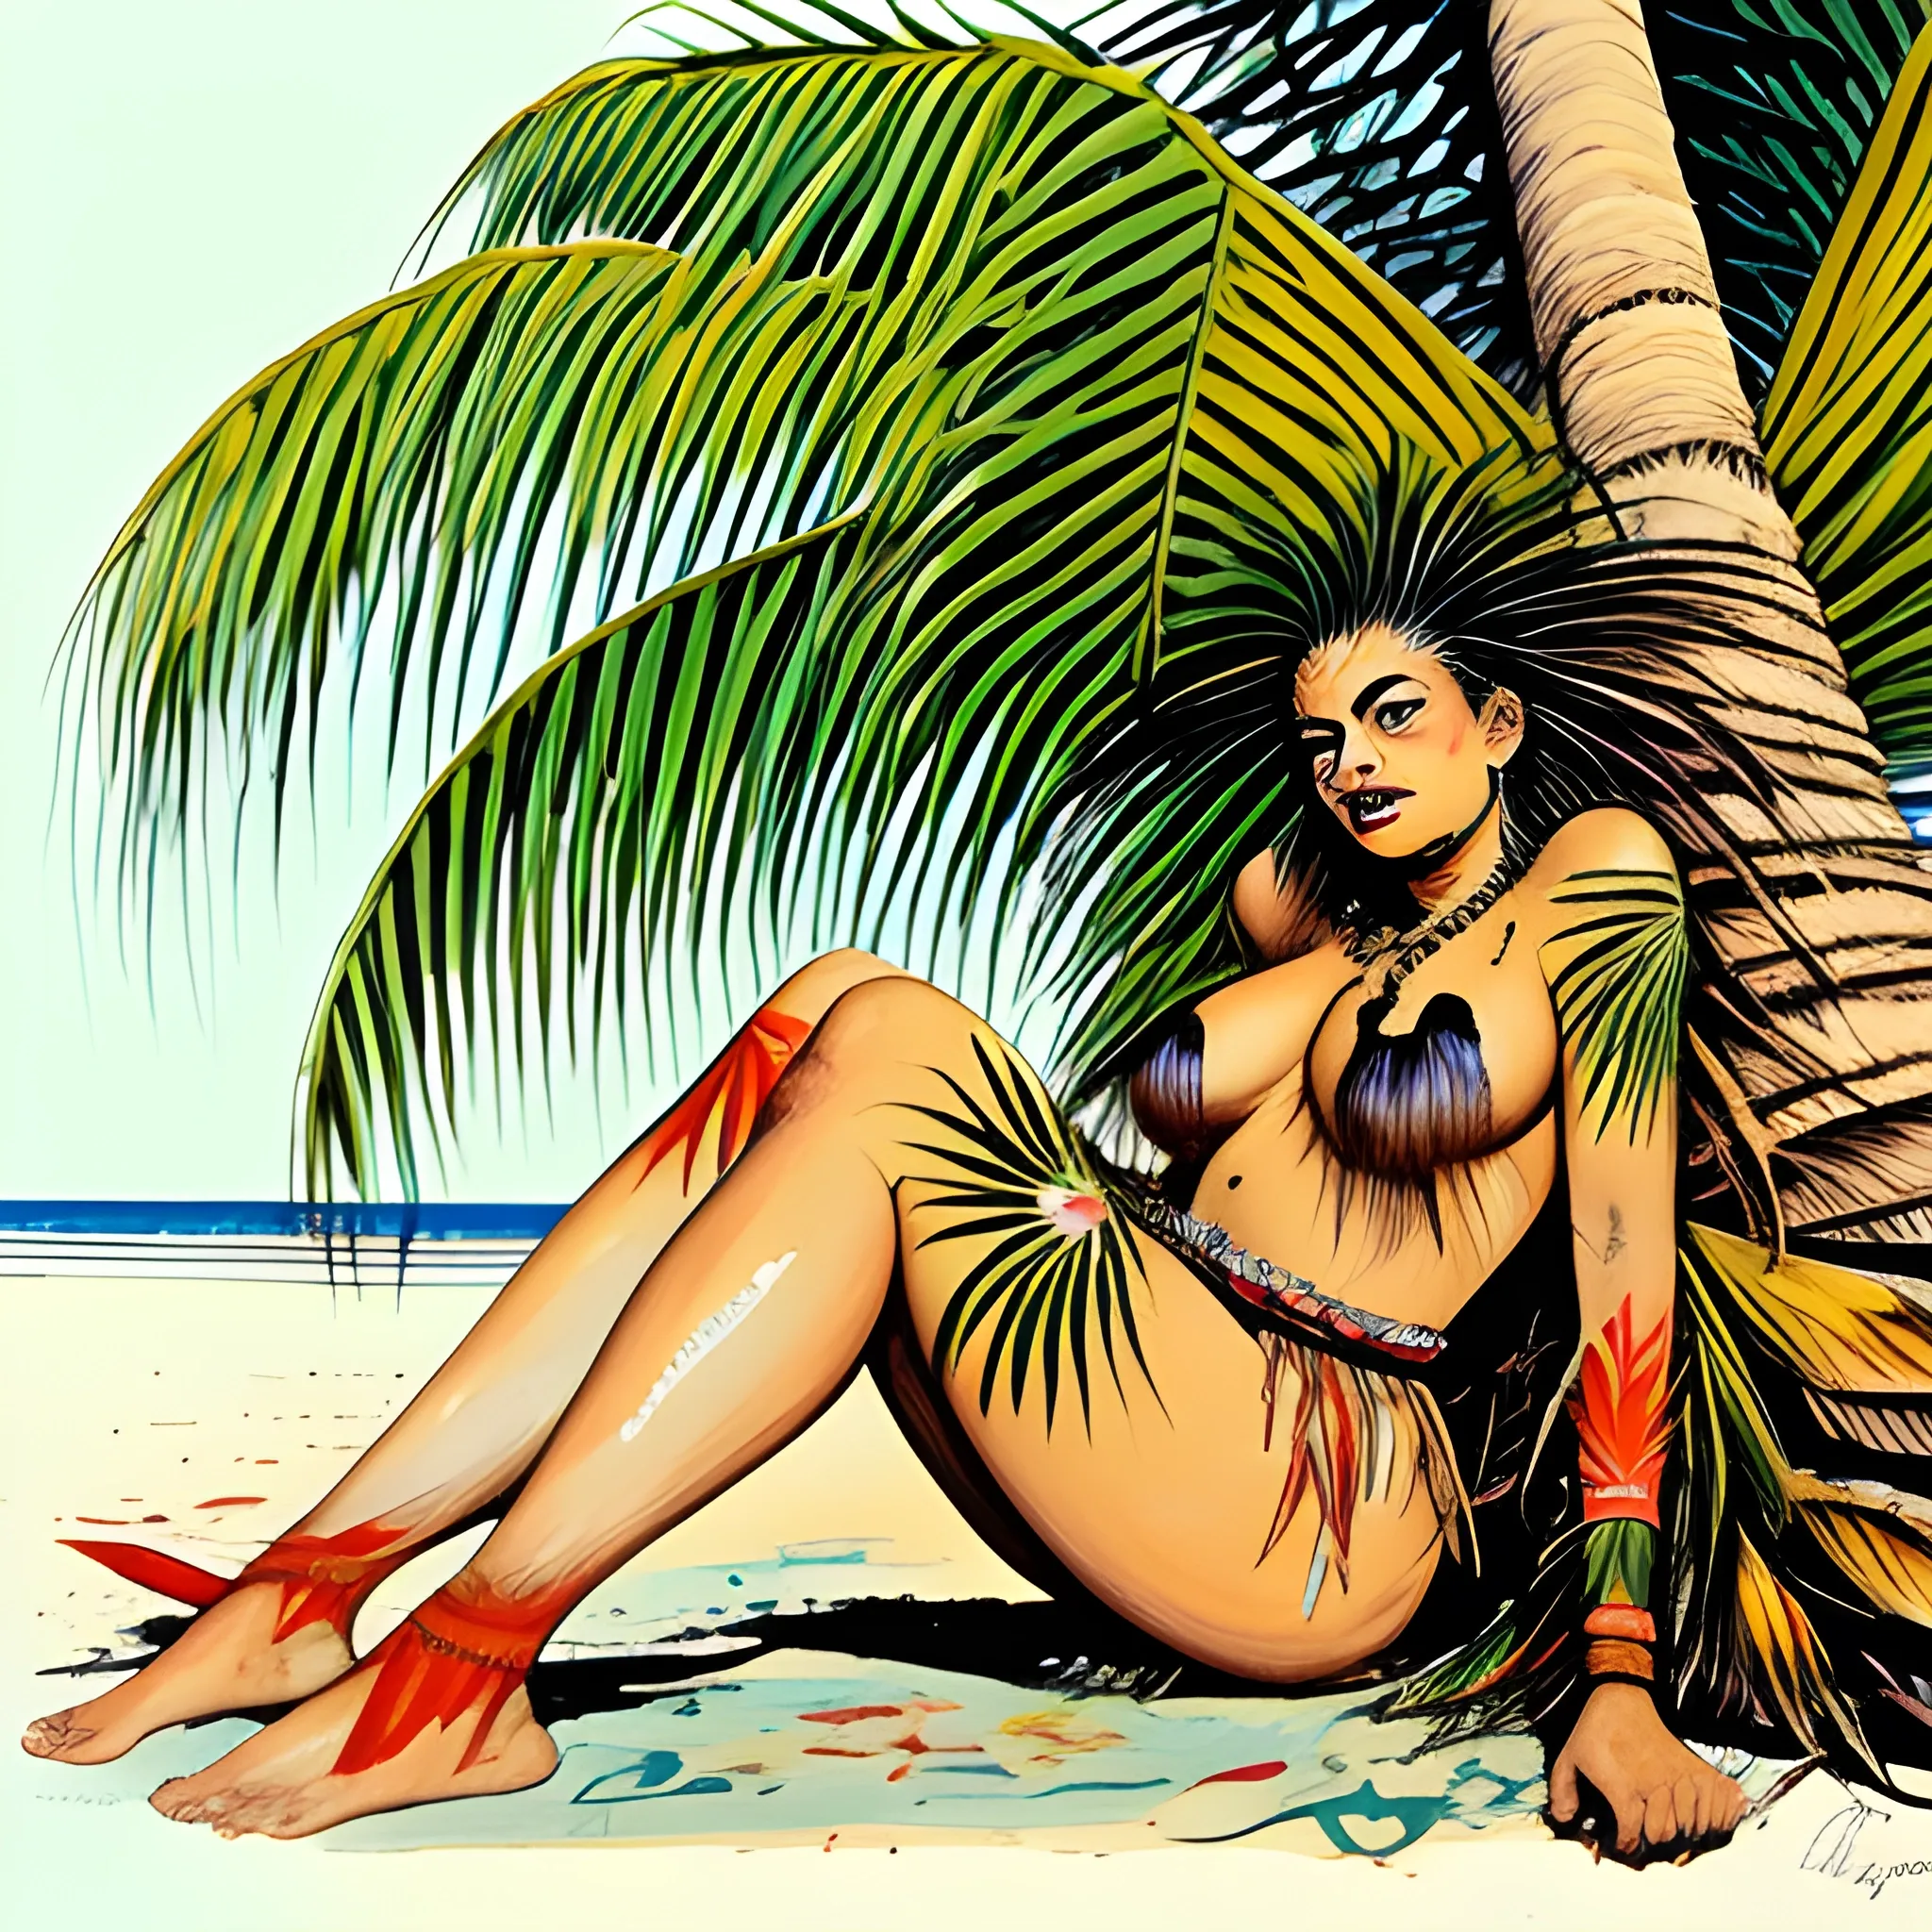 Ralph Steadman painting of exotic polynesian woman under a palm tree